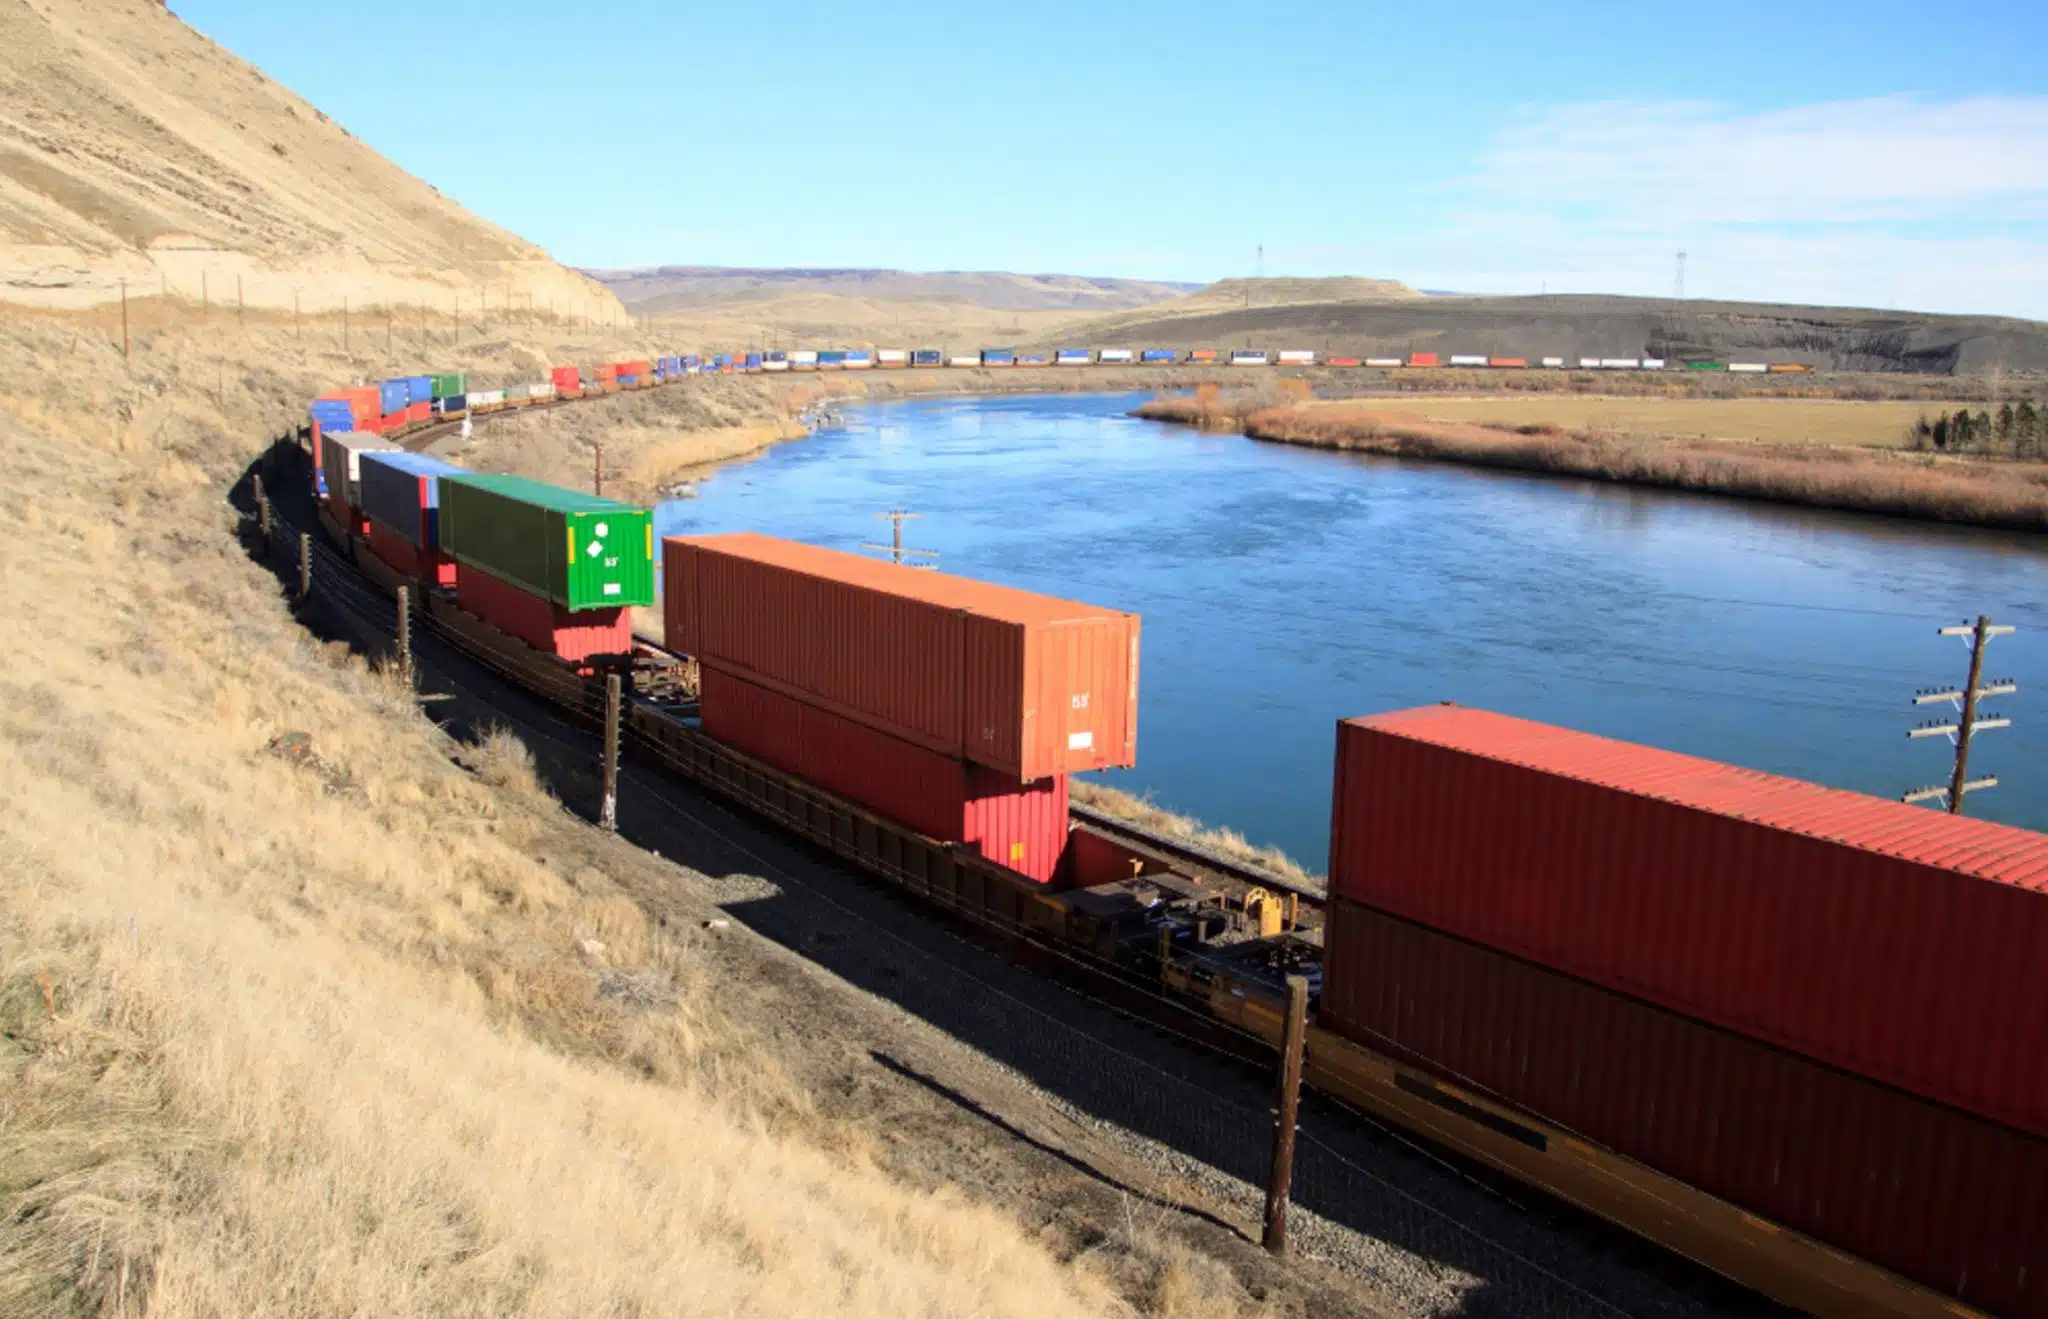 Intermodal: How Smart Packing Reinvented Freight Rail